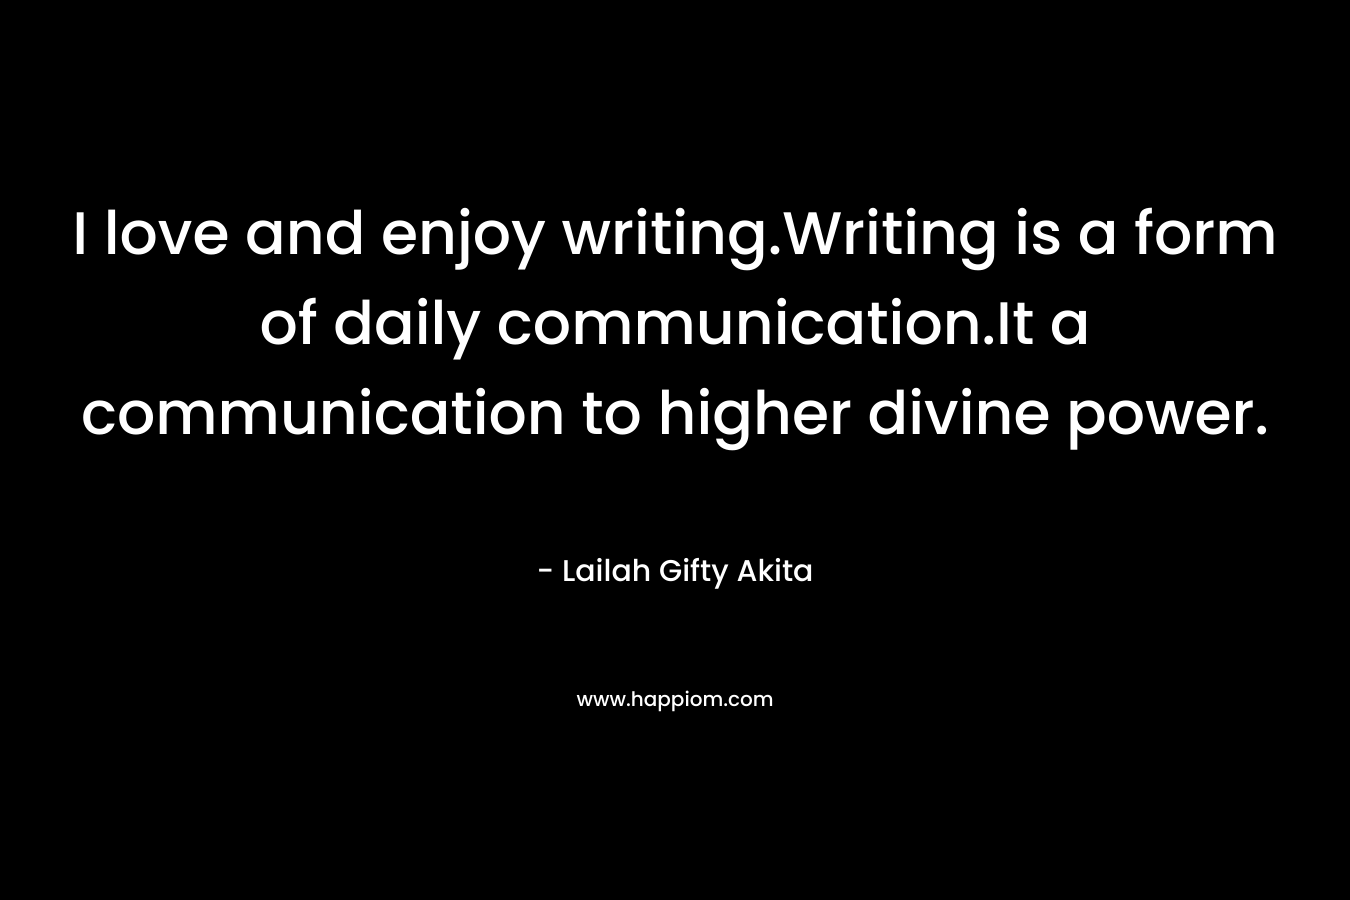 I love and enjoy writing.Writing is a form of daily communication.It a communication to higher divine power.